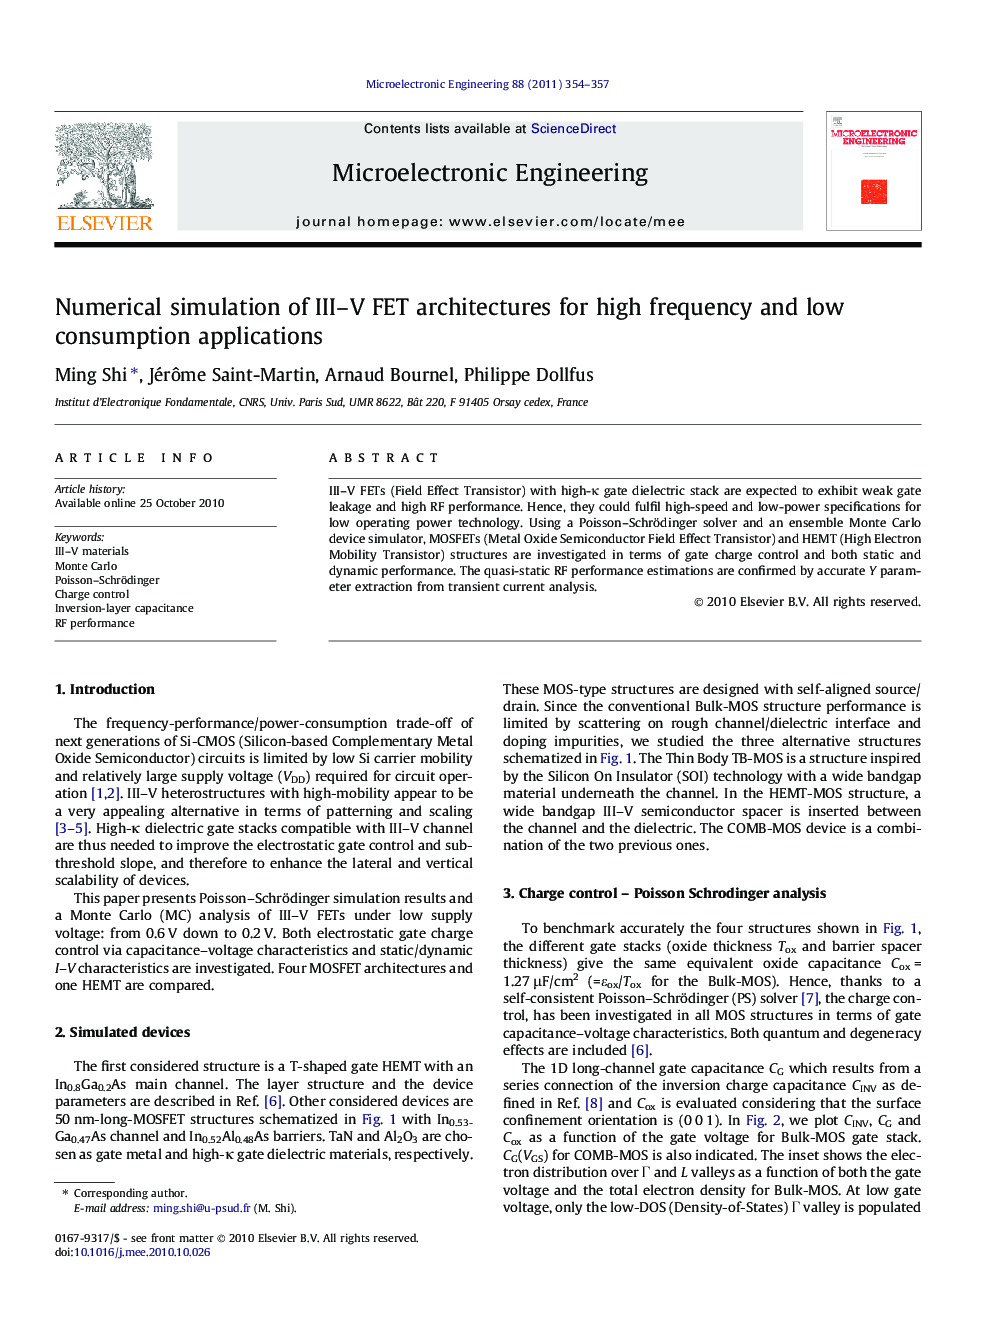 Numerical simulation of III–V FET architectures for high frequency and low consumption applications